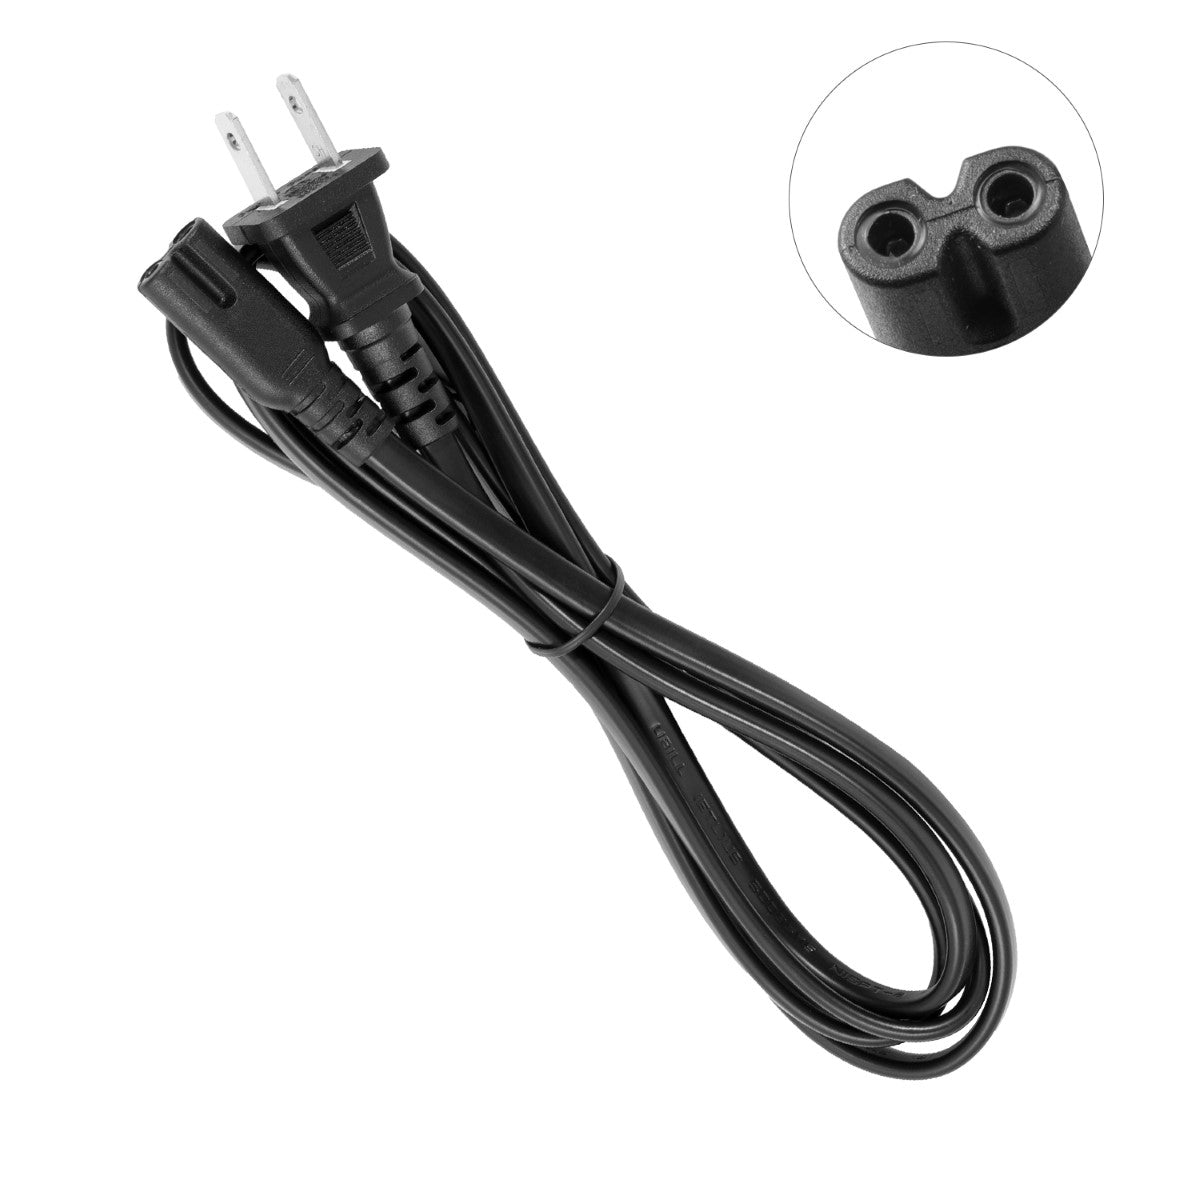 Power Cable for HP OfficeJet 250 Mobile Printer.